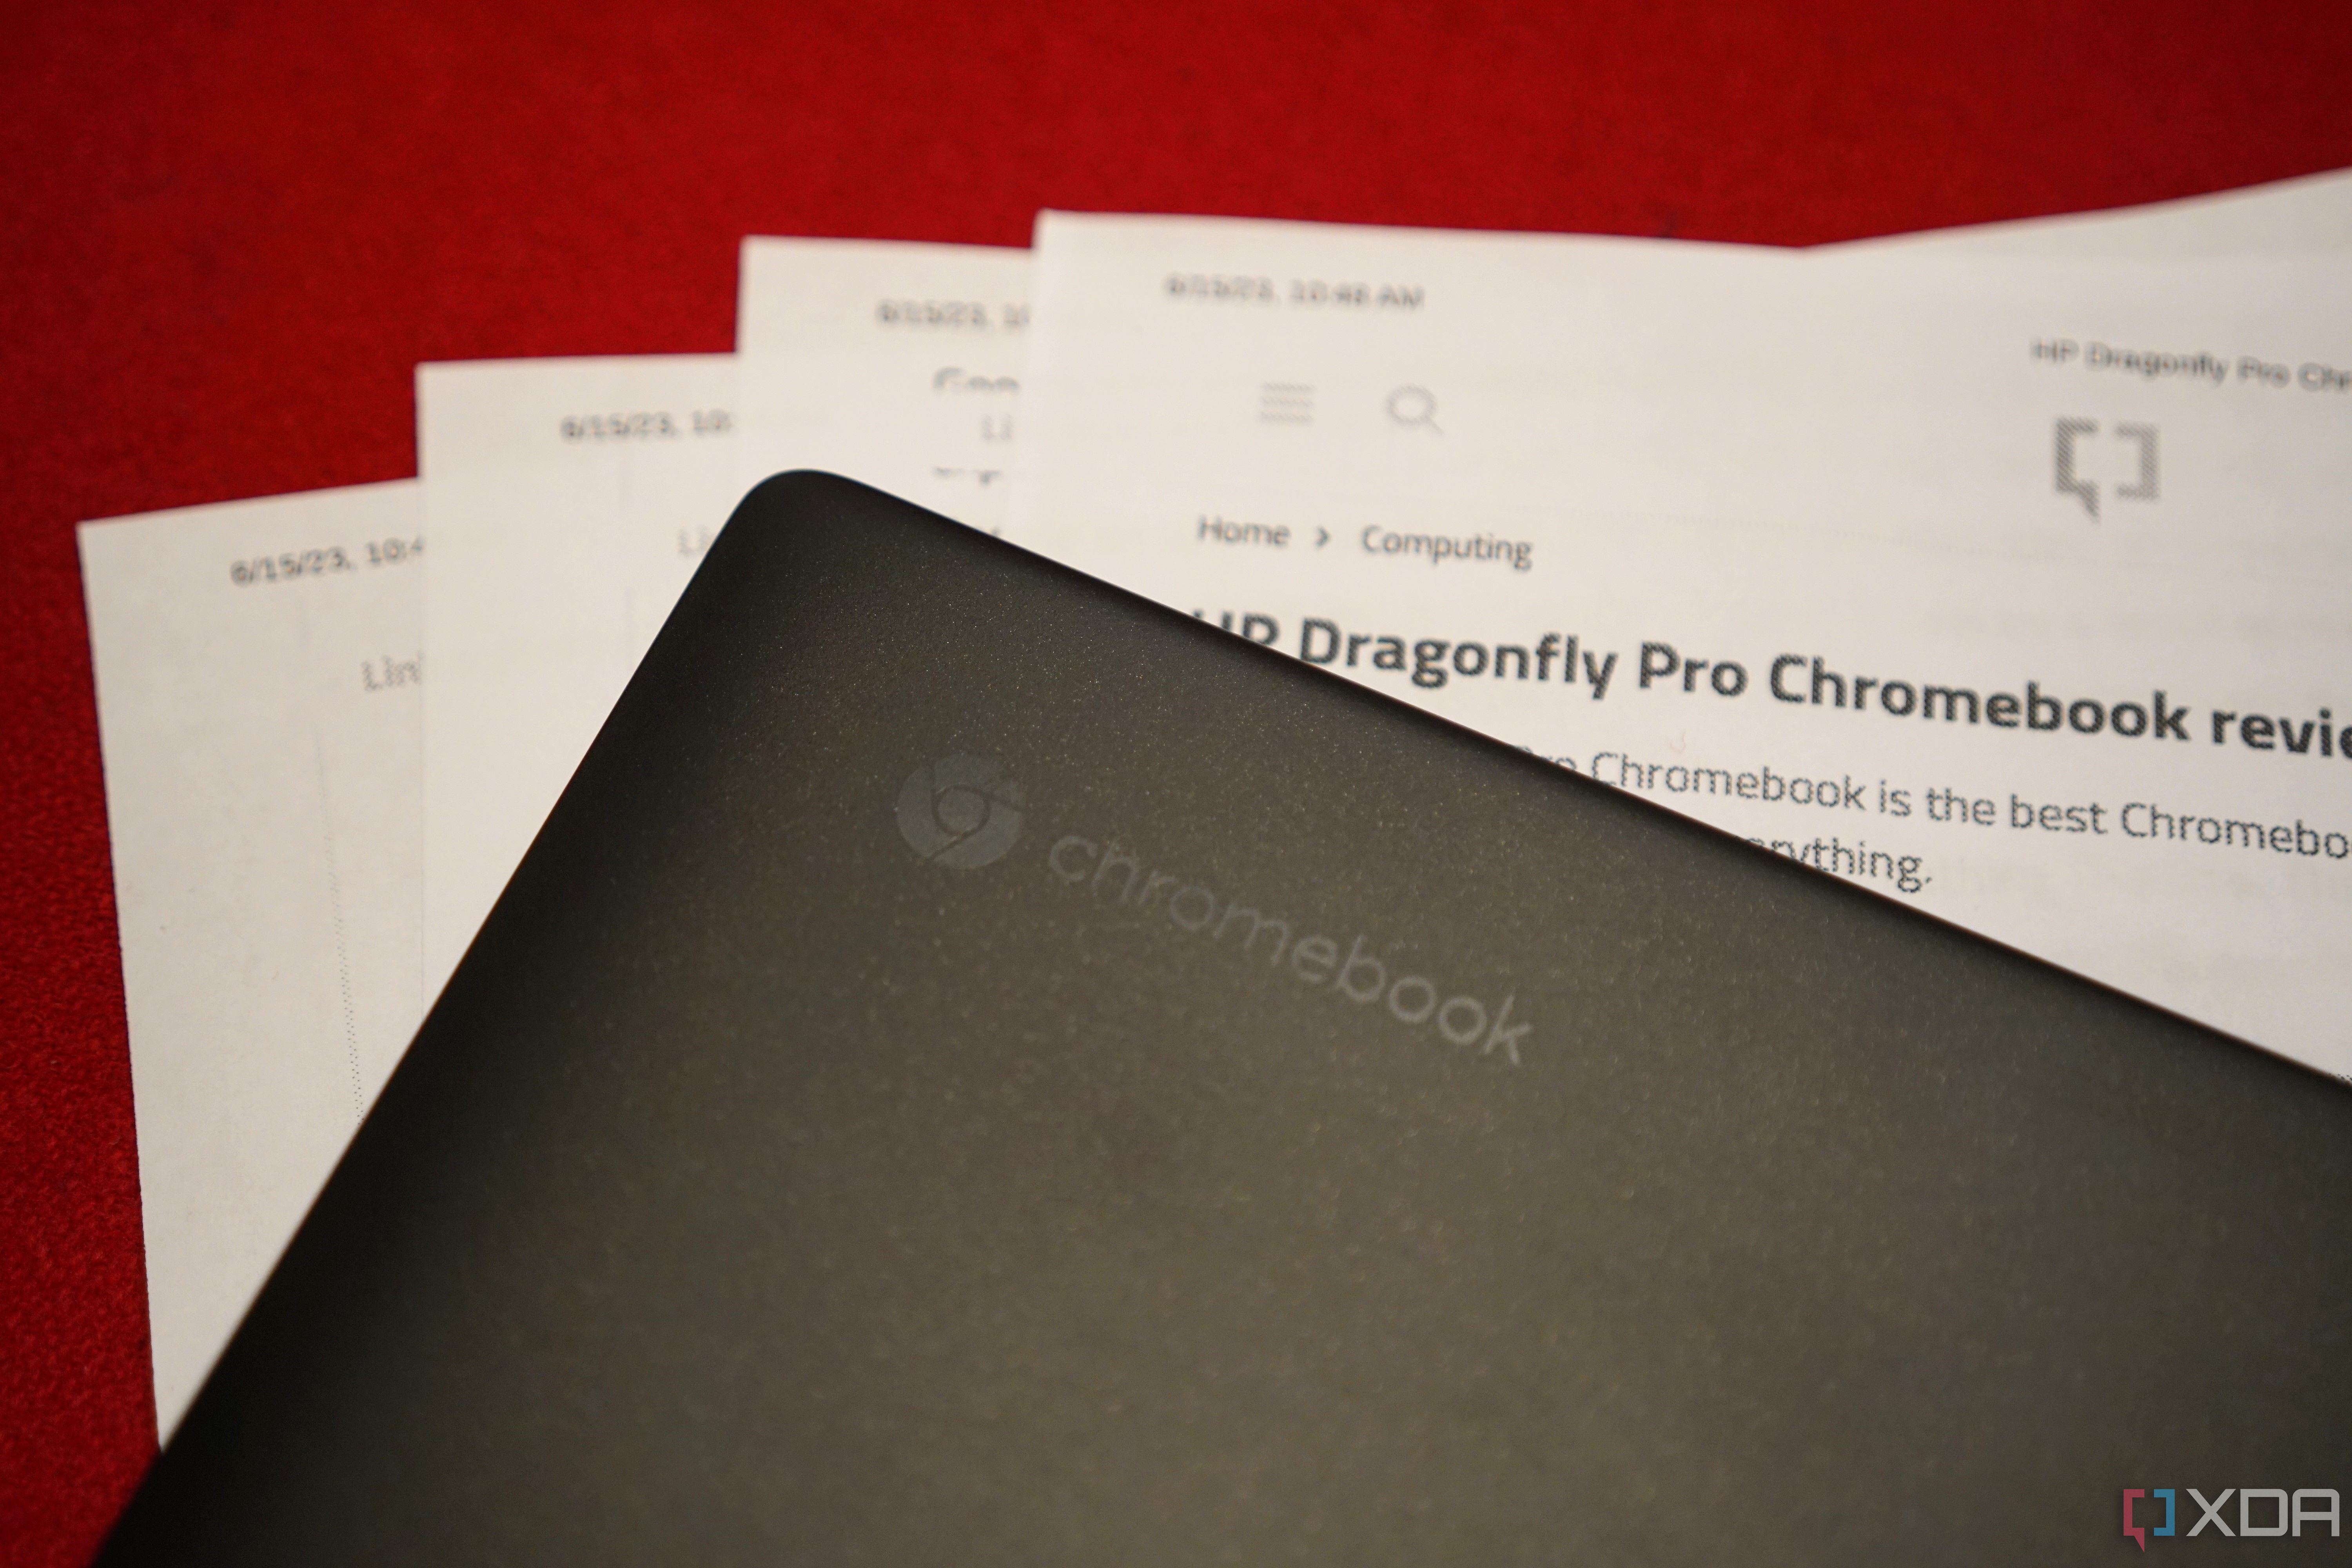 The HP Dragonfly Pro Chromebook laid on top of printed documents.